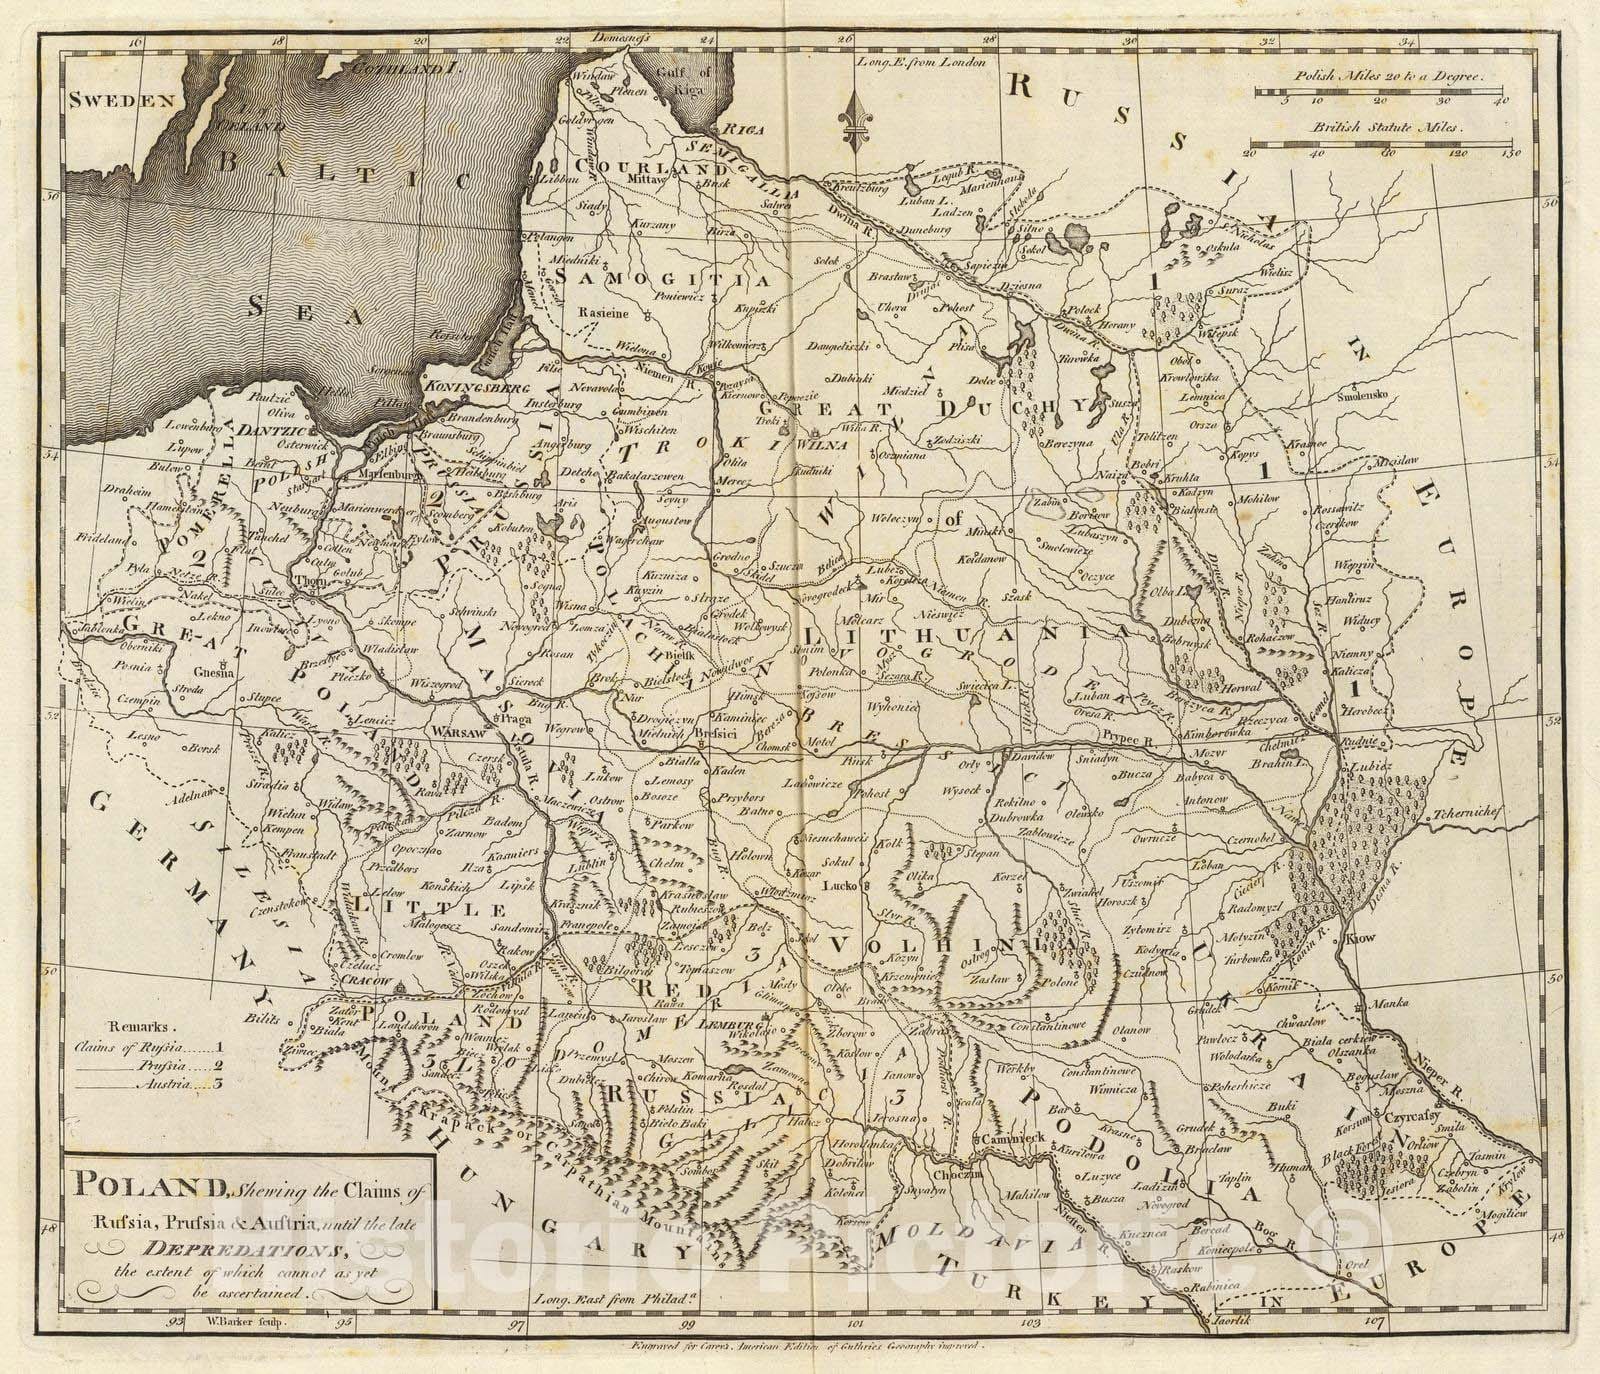 Historic Map : 1796 Poland, Shewing the Claims of Russia, Prussia & Austria. - Vintage Wall Art